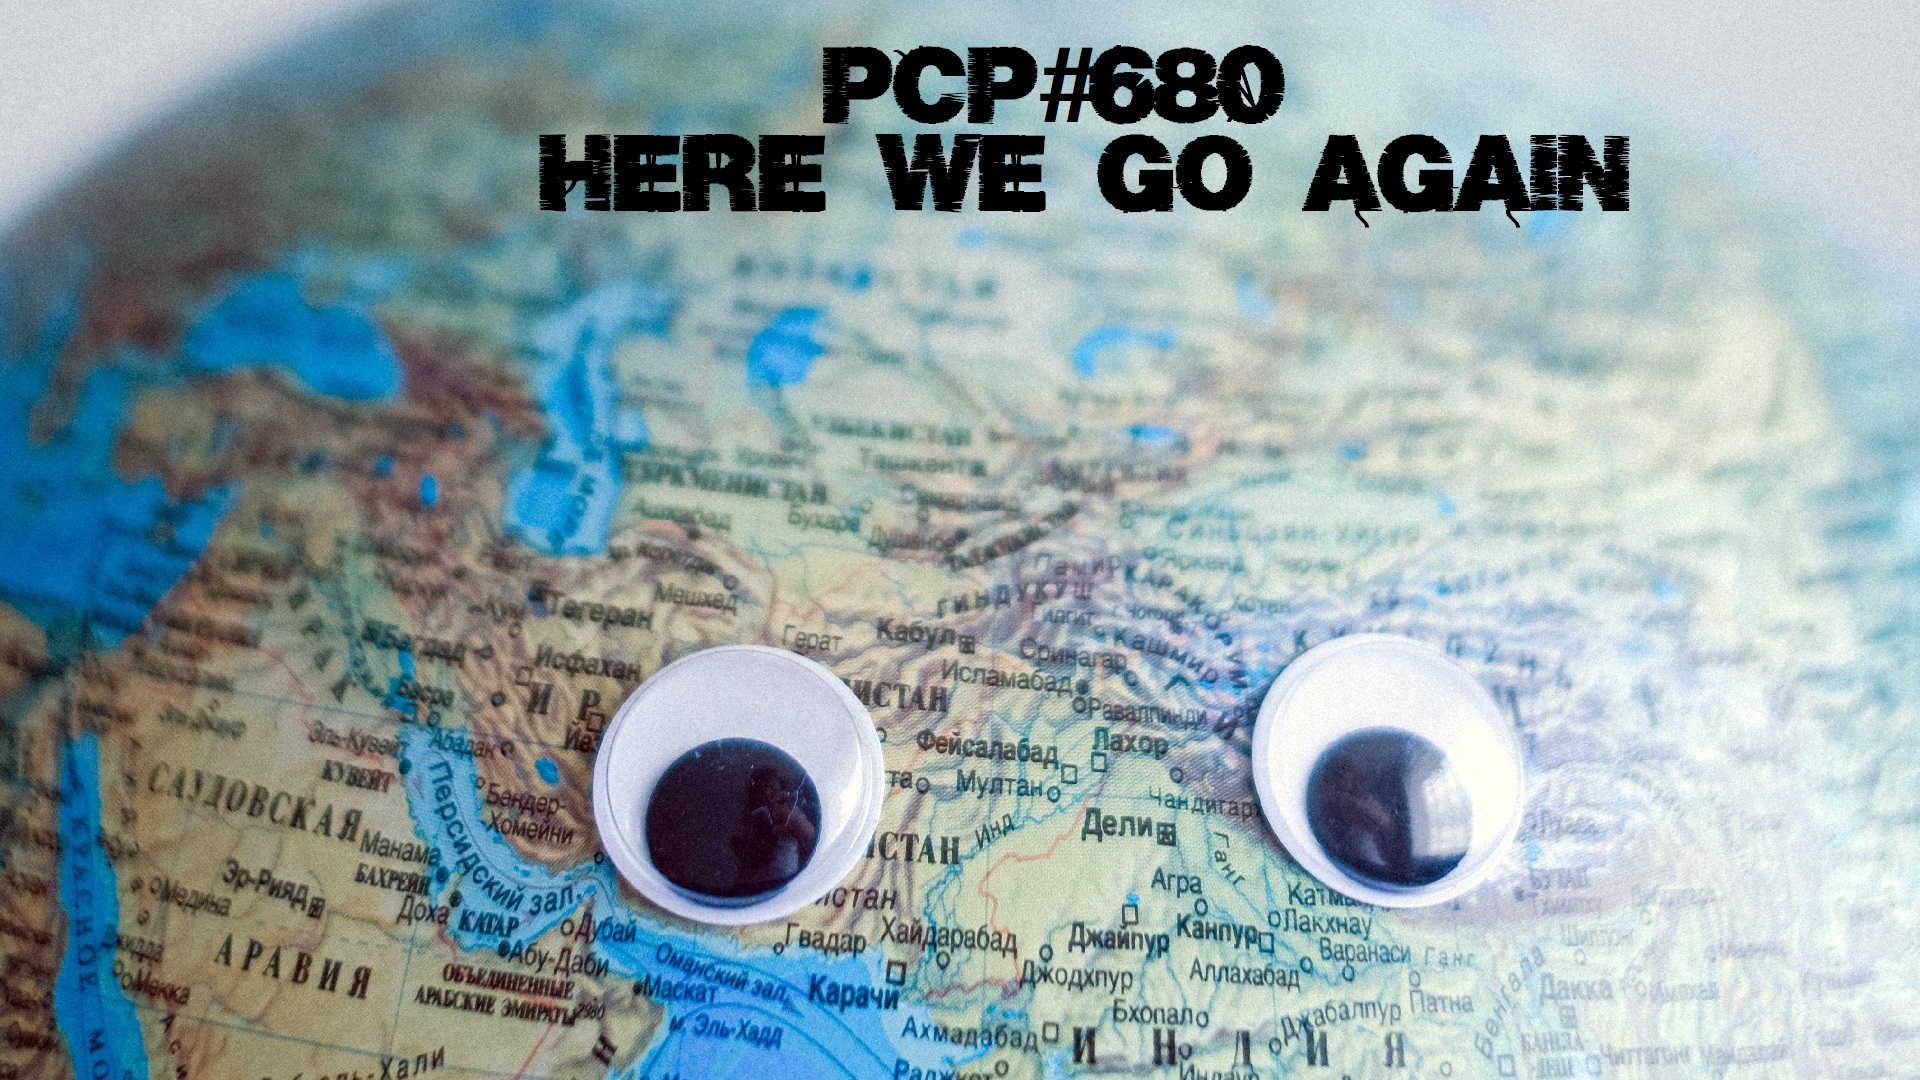 PCP#680... Here we are again!....